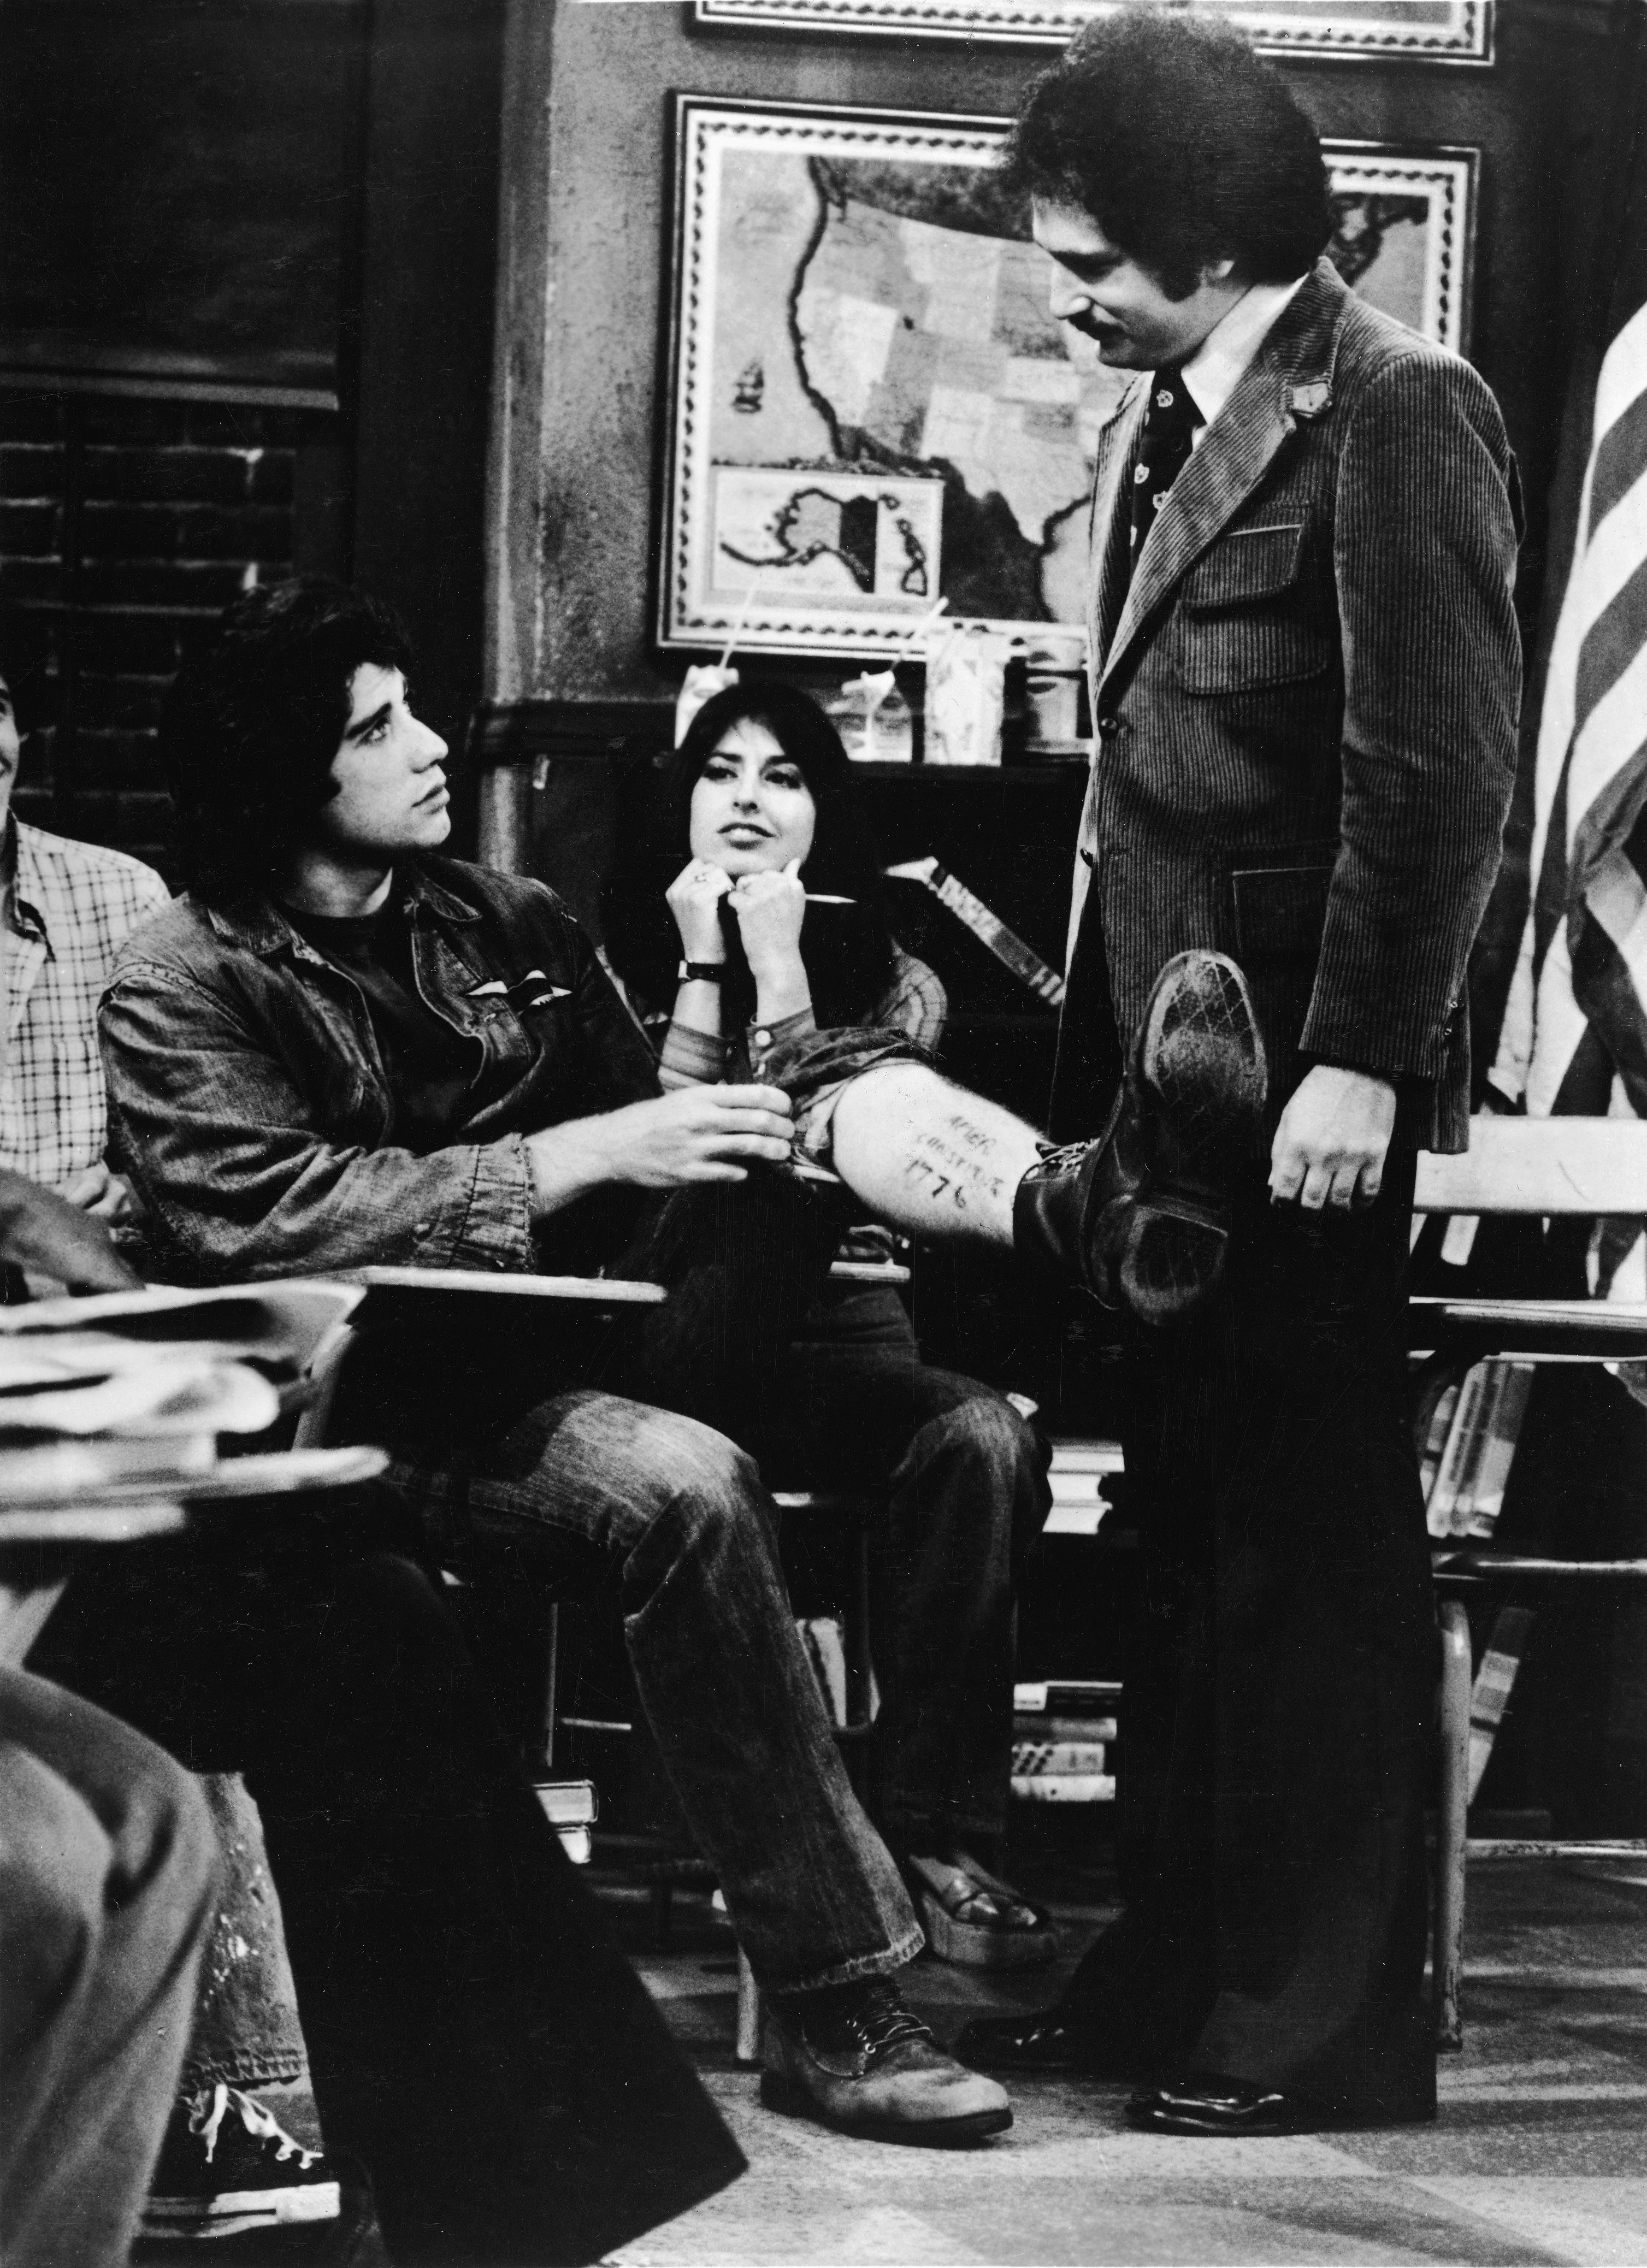 Vinnie Barbarino and Gabe Kotter in a classroom during the filming of 'Welcome Back, Kotter'